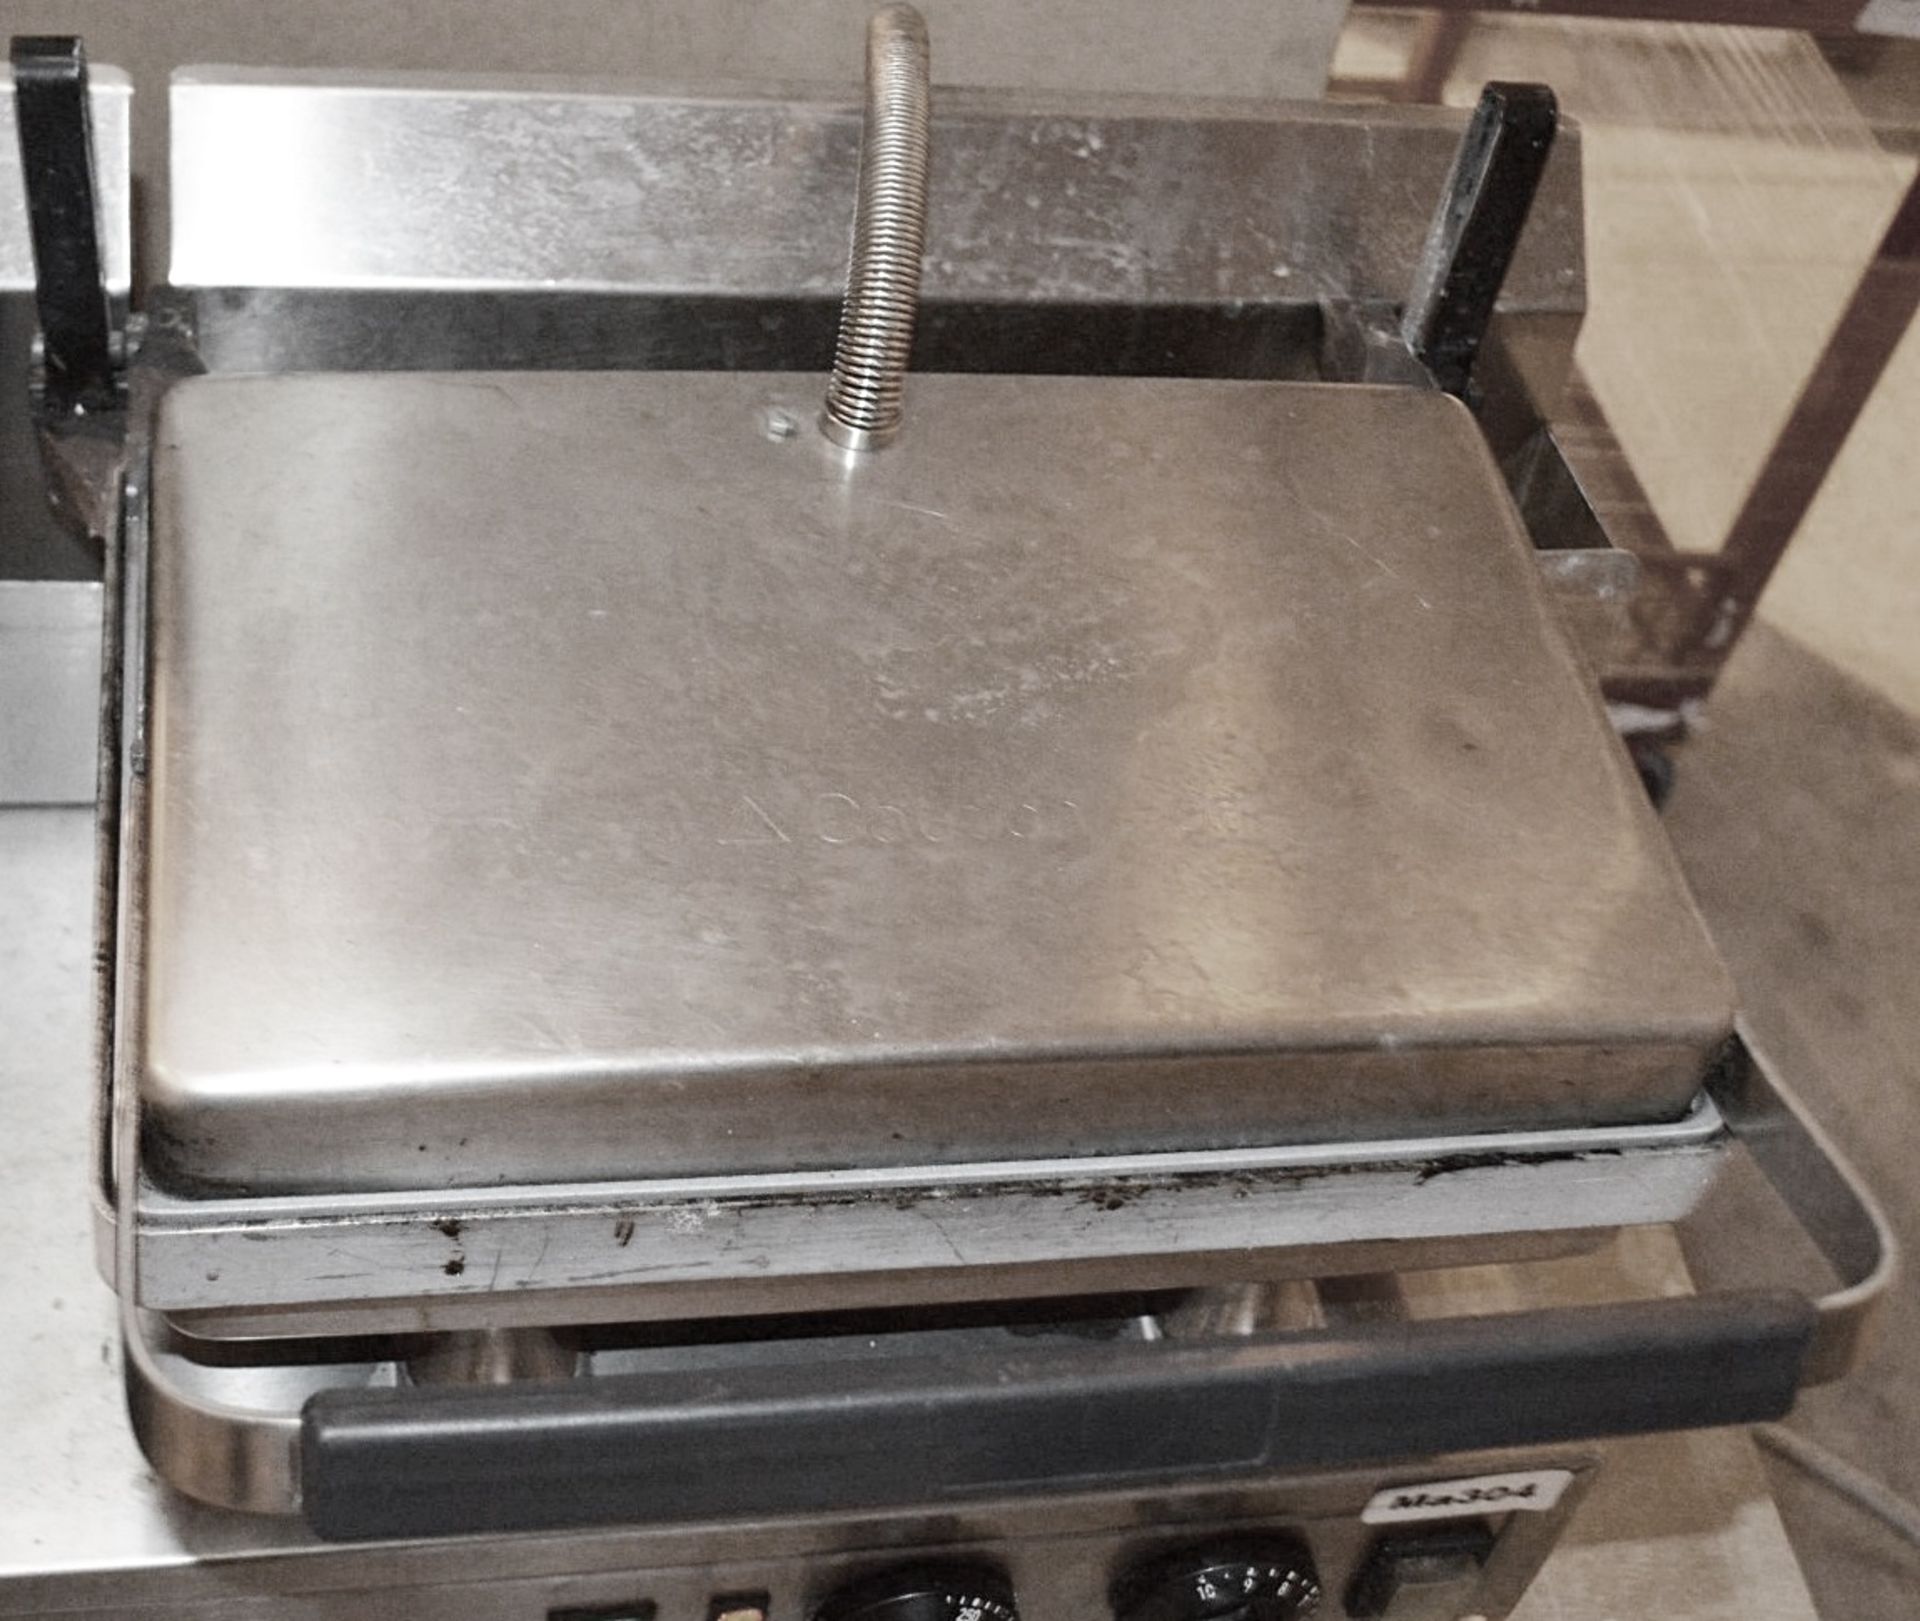 1 x VELOX Double Contact Sandwich / Panini Grill With Smooth Cooking Surfaces - Dimensions: W88 x - Image 3 of 7